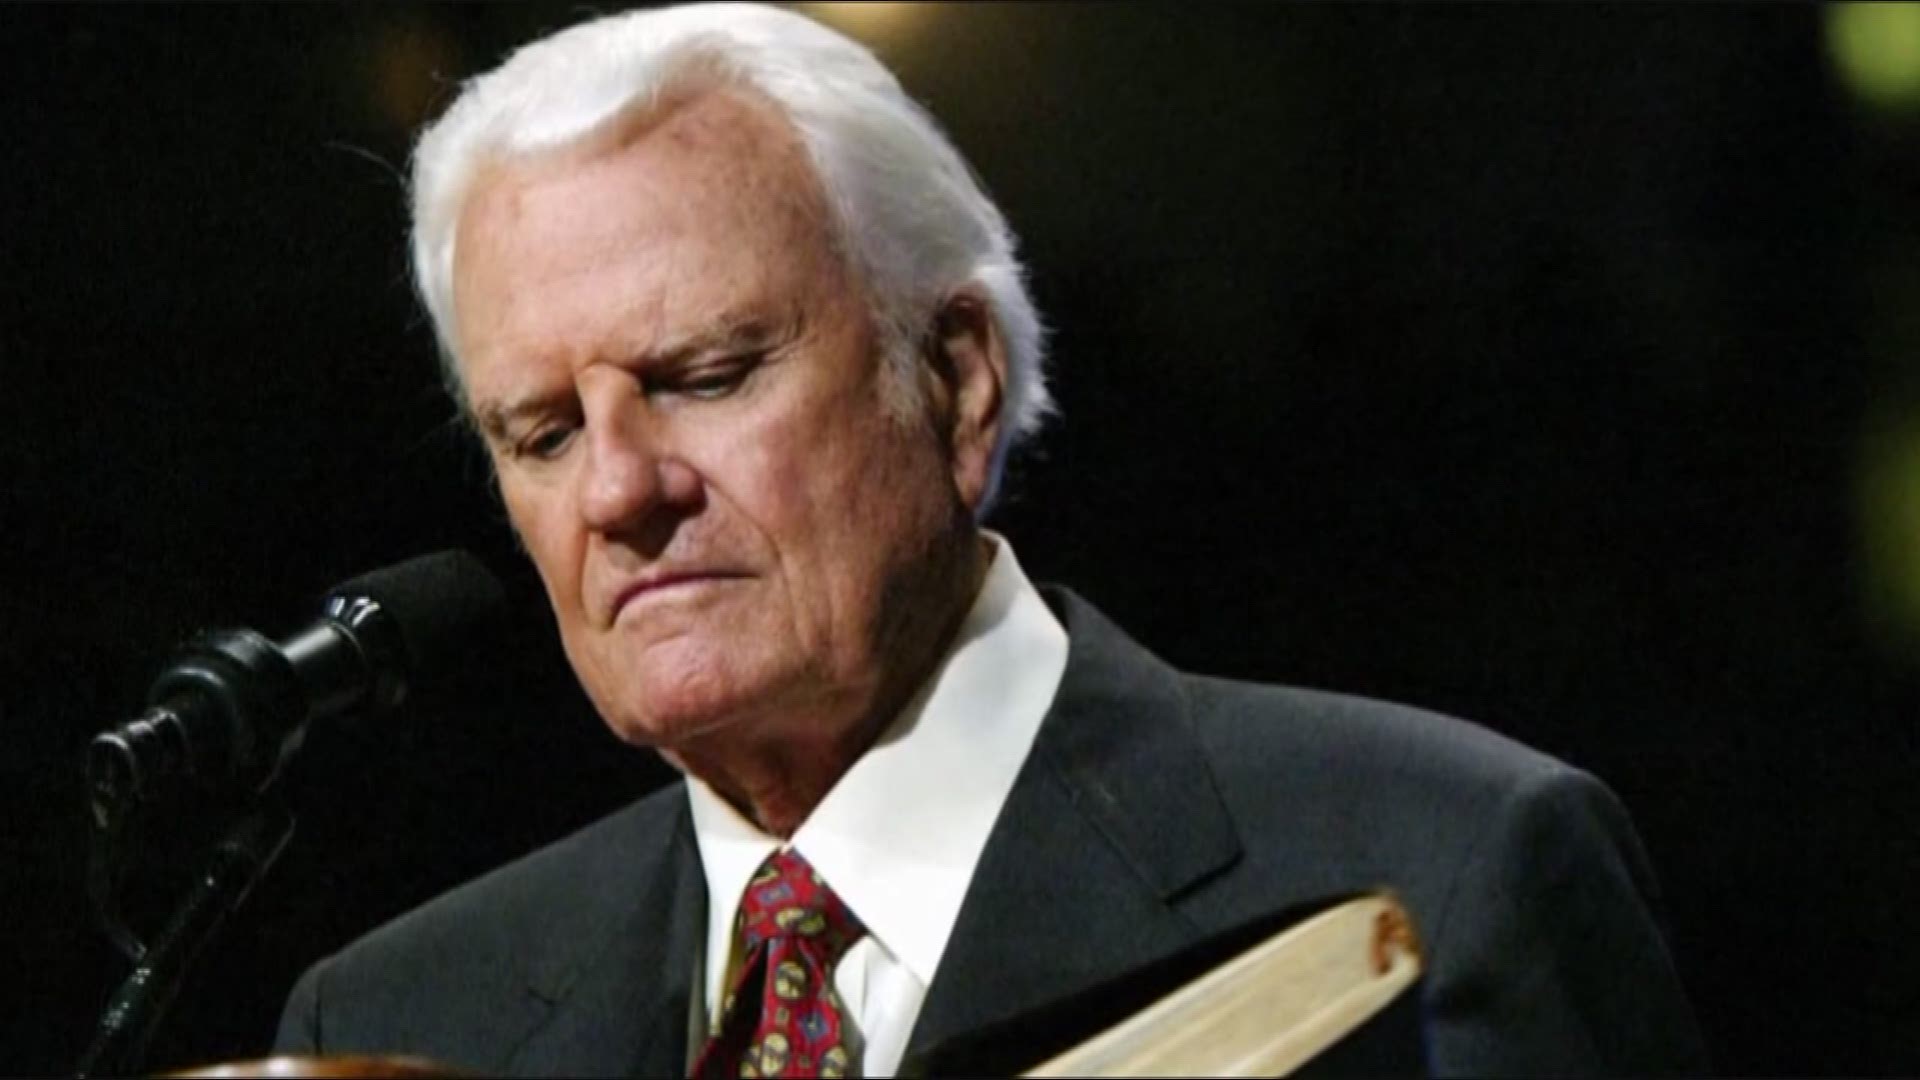 Rev. Franklin Graham reflects on lessons he learned from his late father Rev. Billy Graham